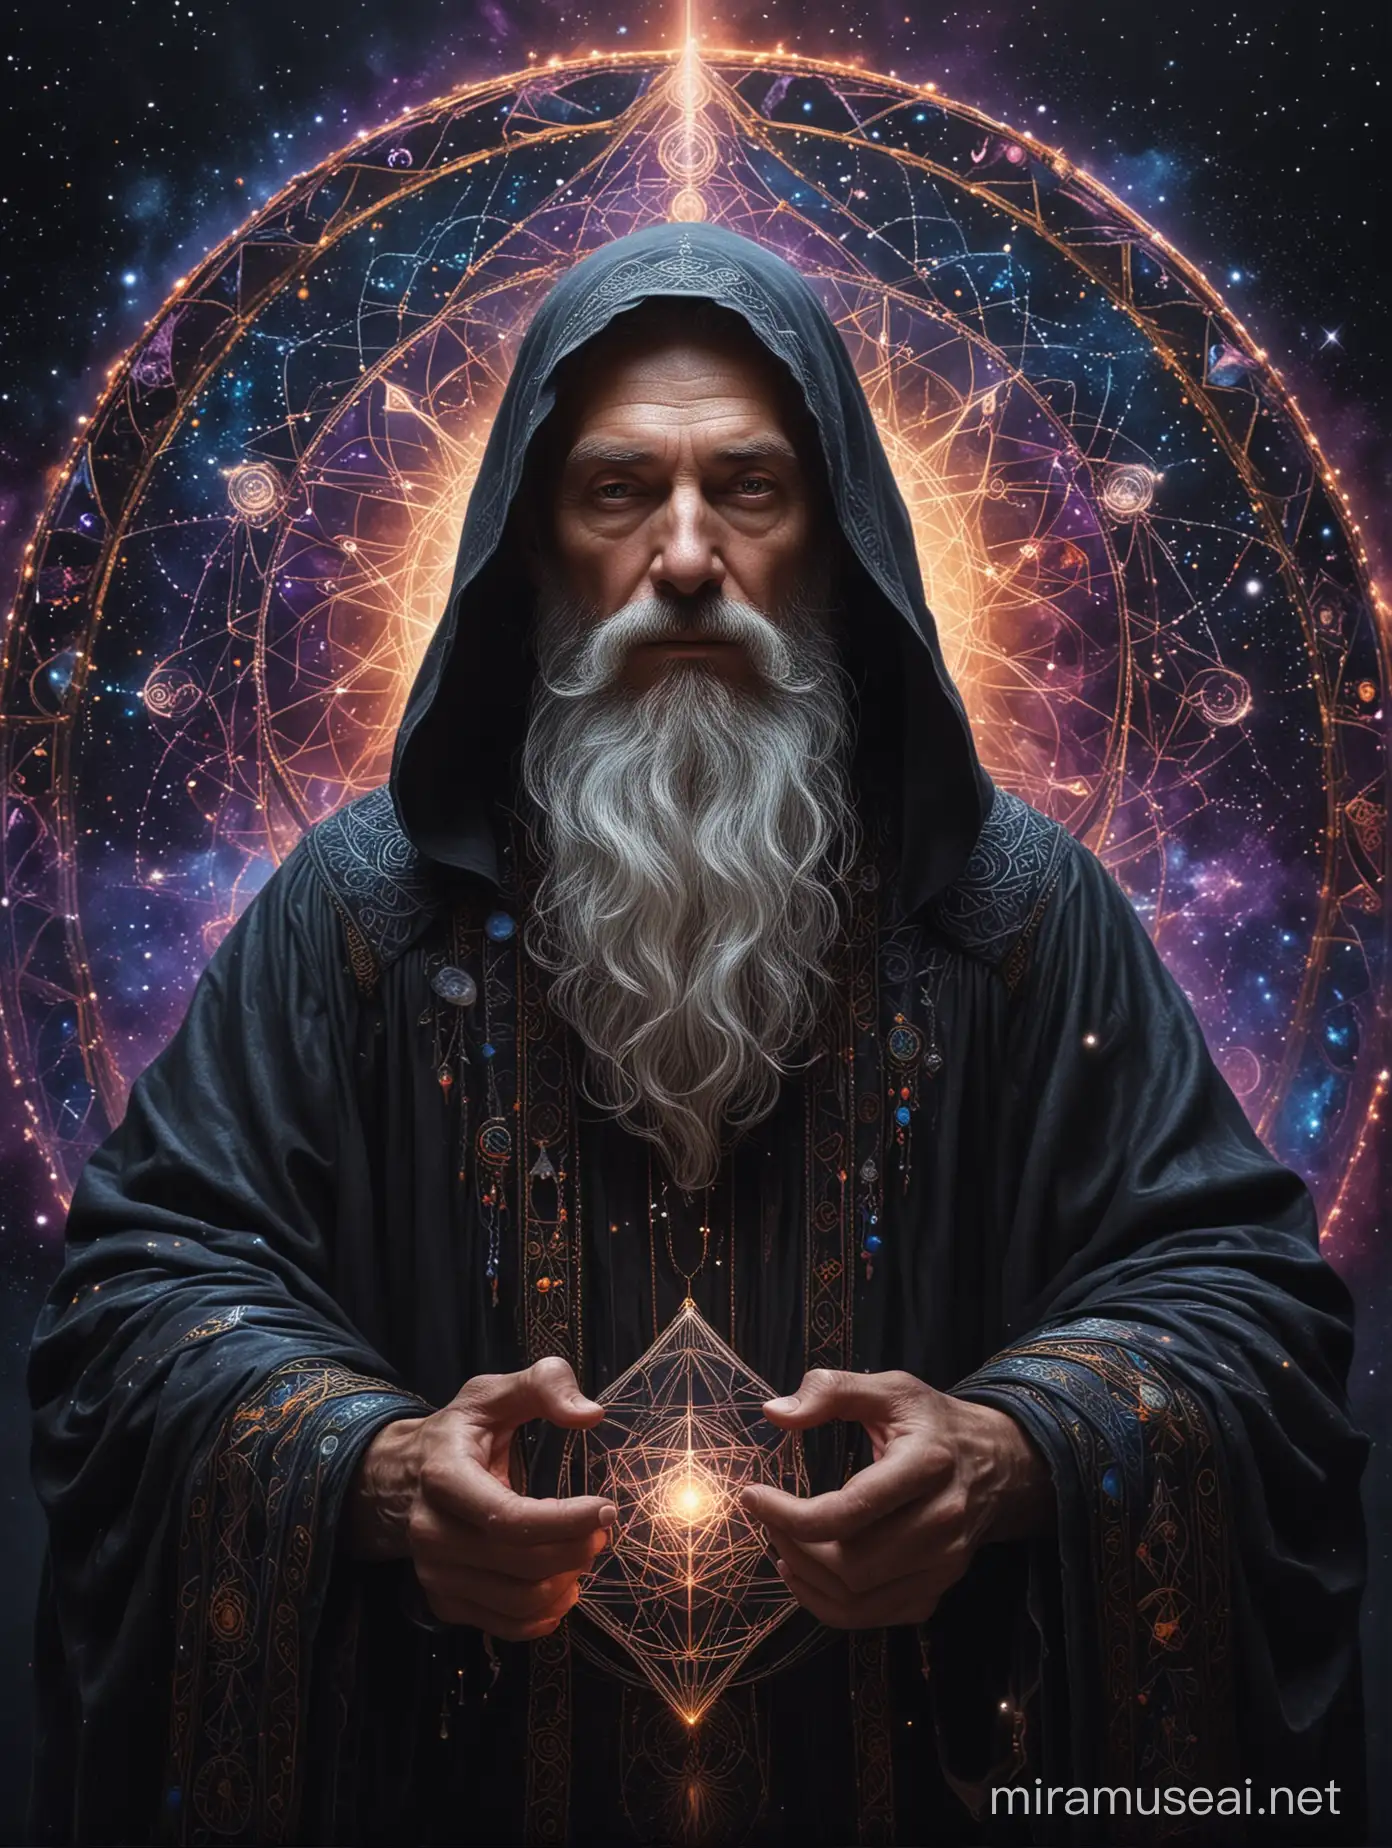 wizard who exudes a sense of power and mystery. He is cloaked in dark, richly detailed robes that are adorned with cosmic and mystical symbols. His beard is long and white, suggesting wisdom and age. His eyes are closed, but on his forehead is a third eye, open and decorated, implying a heightened perception or psychic ability. Above and around him is a geodesic mandala, intricate with geometric patterns that glow with a vibrant, neon light, giving an impression of depth and complexity. The mandala and the wizard together project a theme that is both intimidating and mystical, as if this being has access to profound and ancient knowledge. The surrounding space is dotted with celestial bodies, reinforcing the theme of the wizard as a traveler through dimensions.